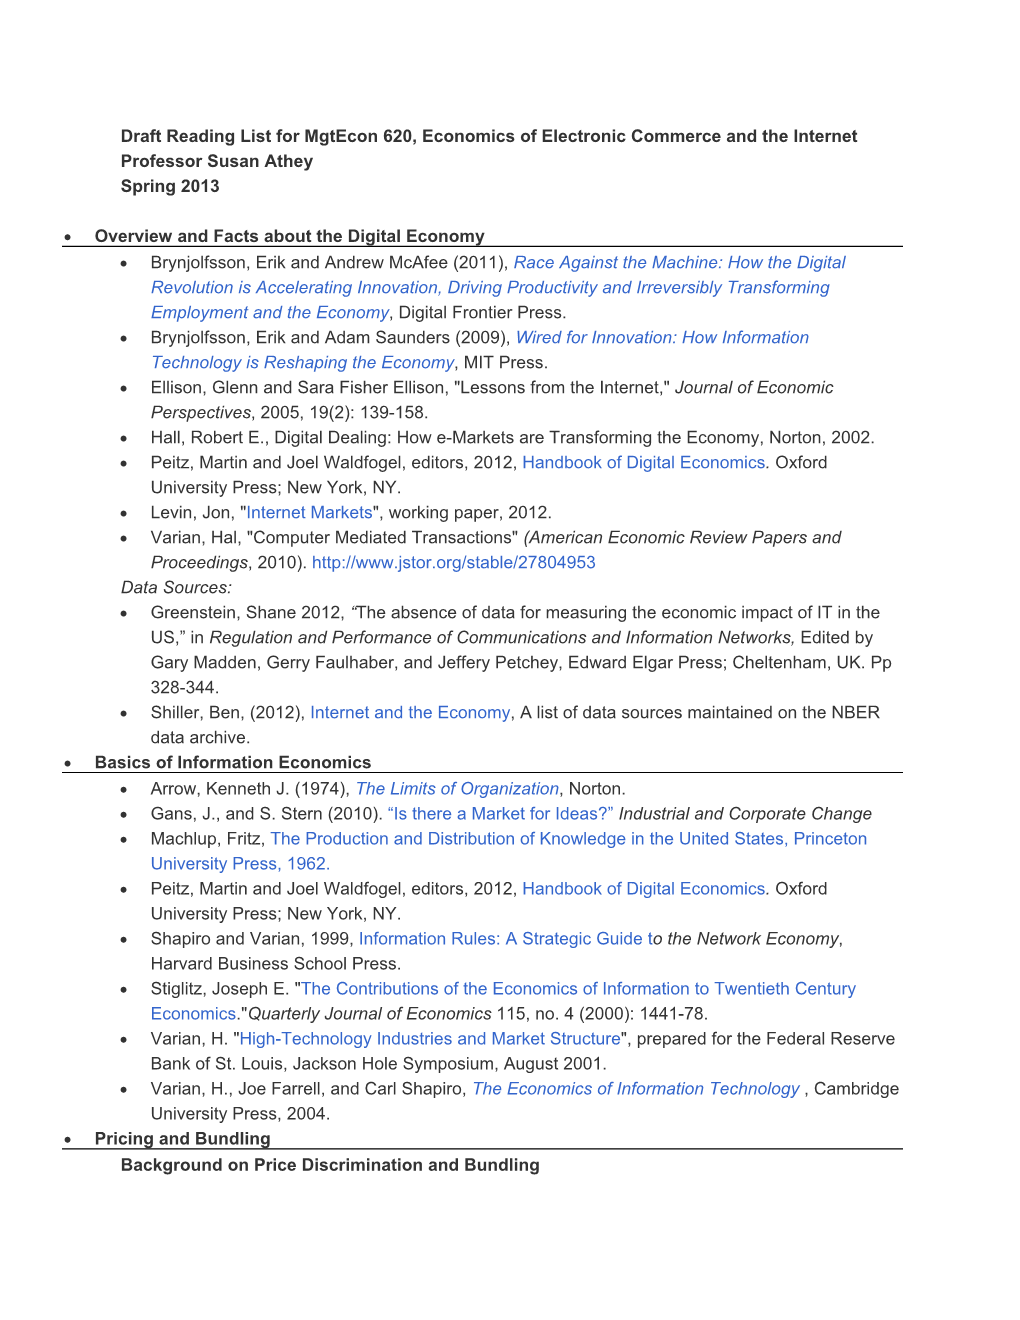 Draft Reading List for Mgtecon 620, Economics of Electronic Commerce and the Internet Professor Susan Athey Spring 2013